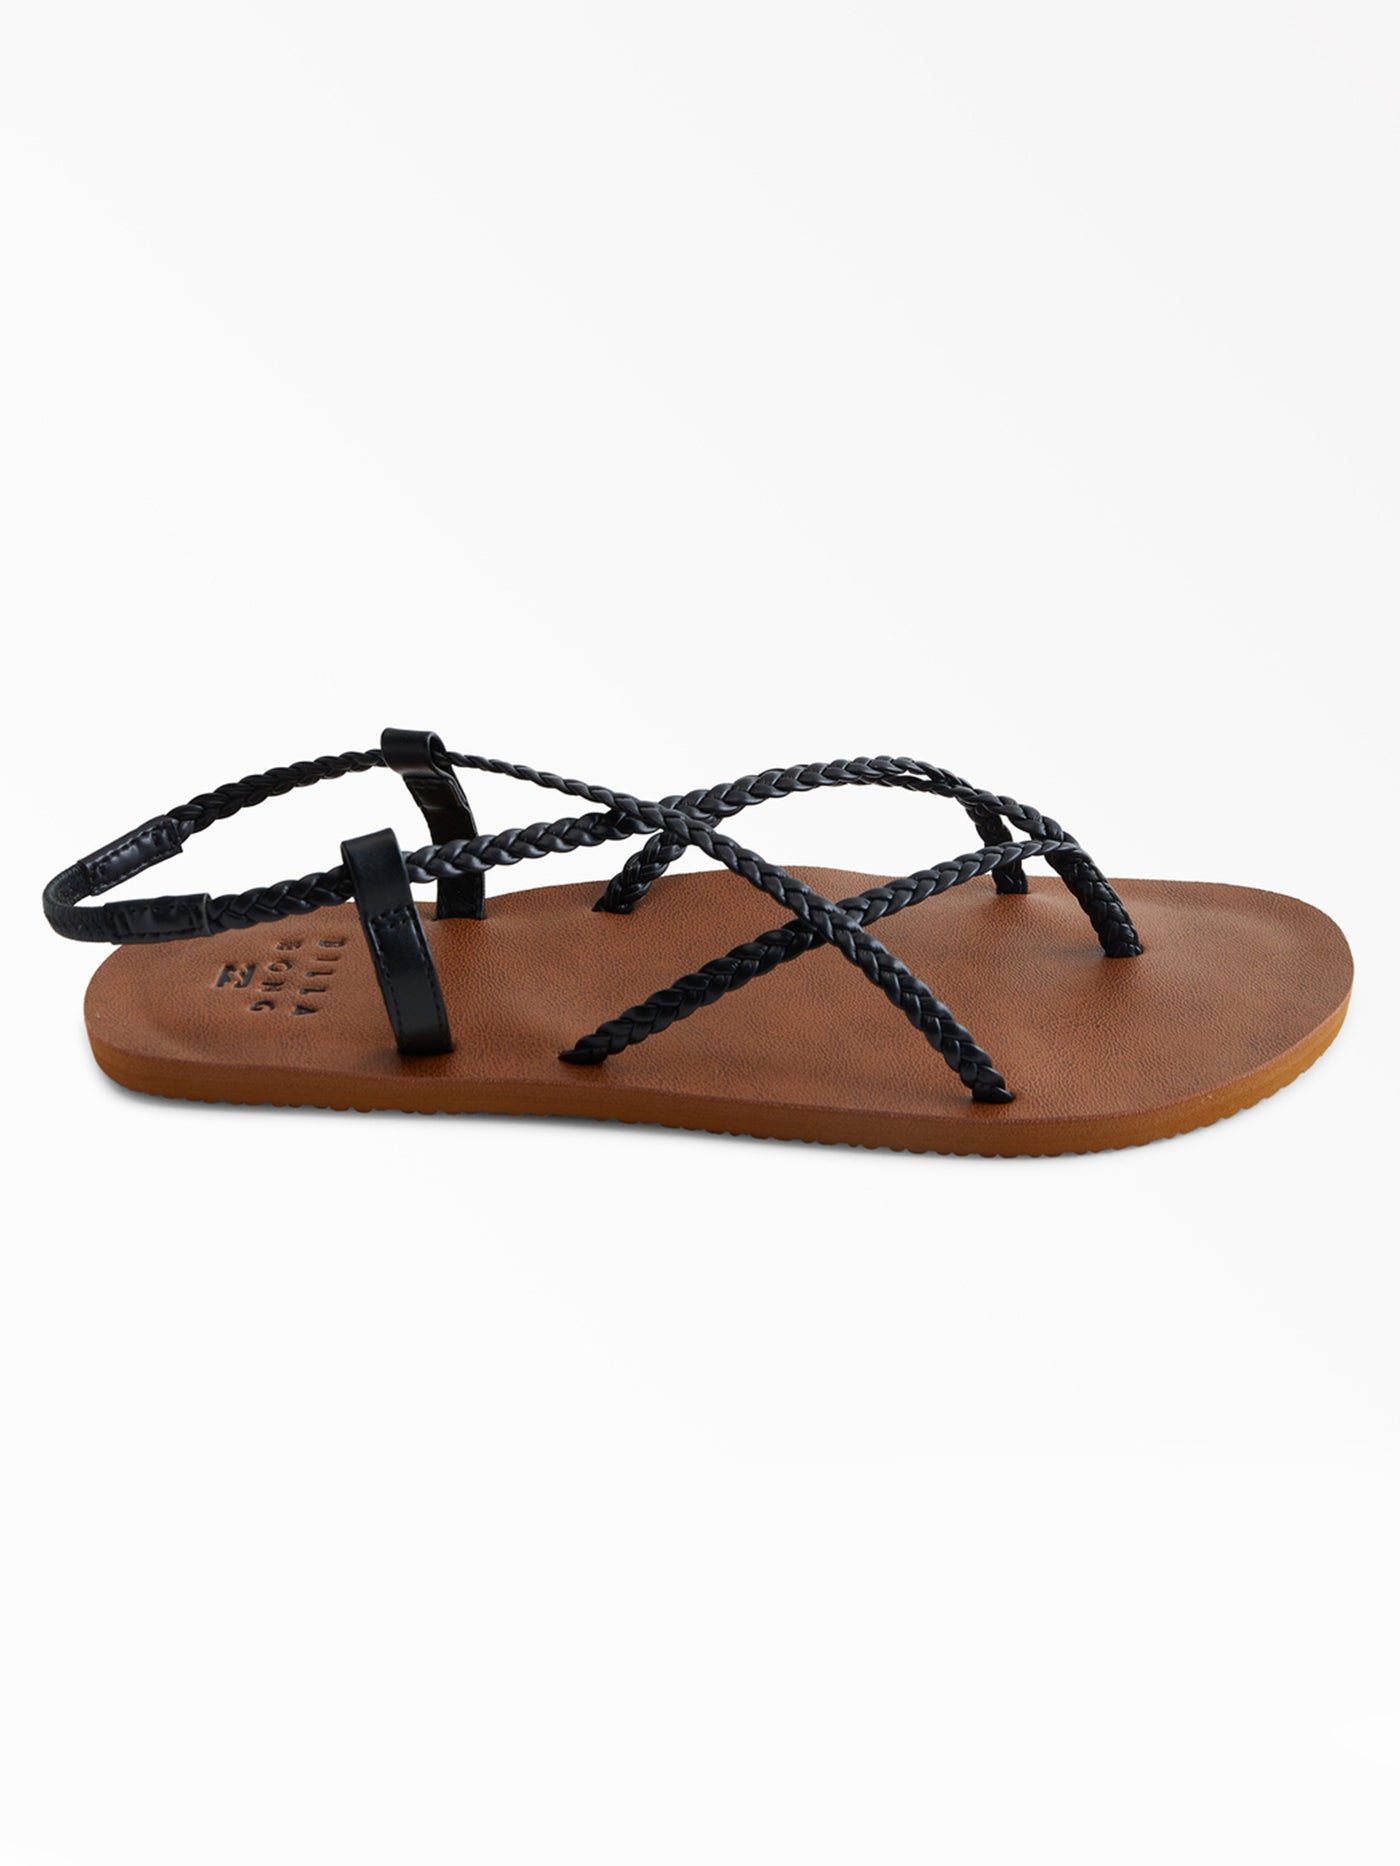 Billabong Crossing By Braided Sandals